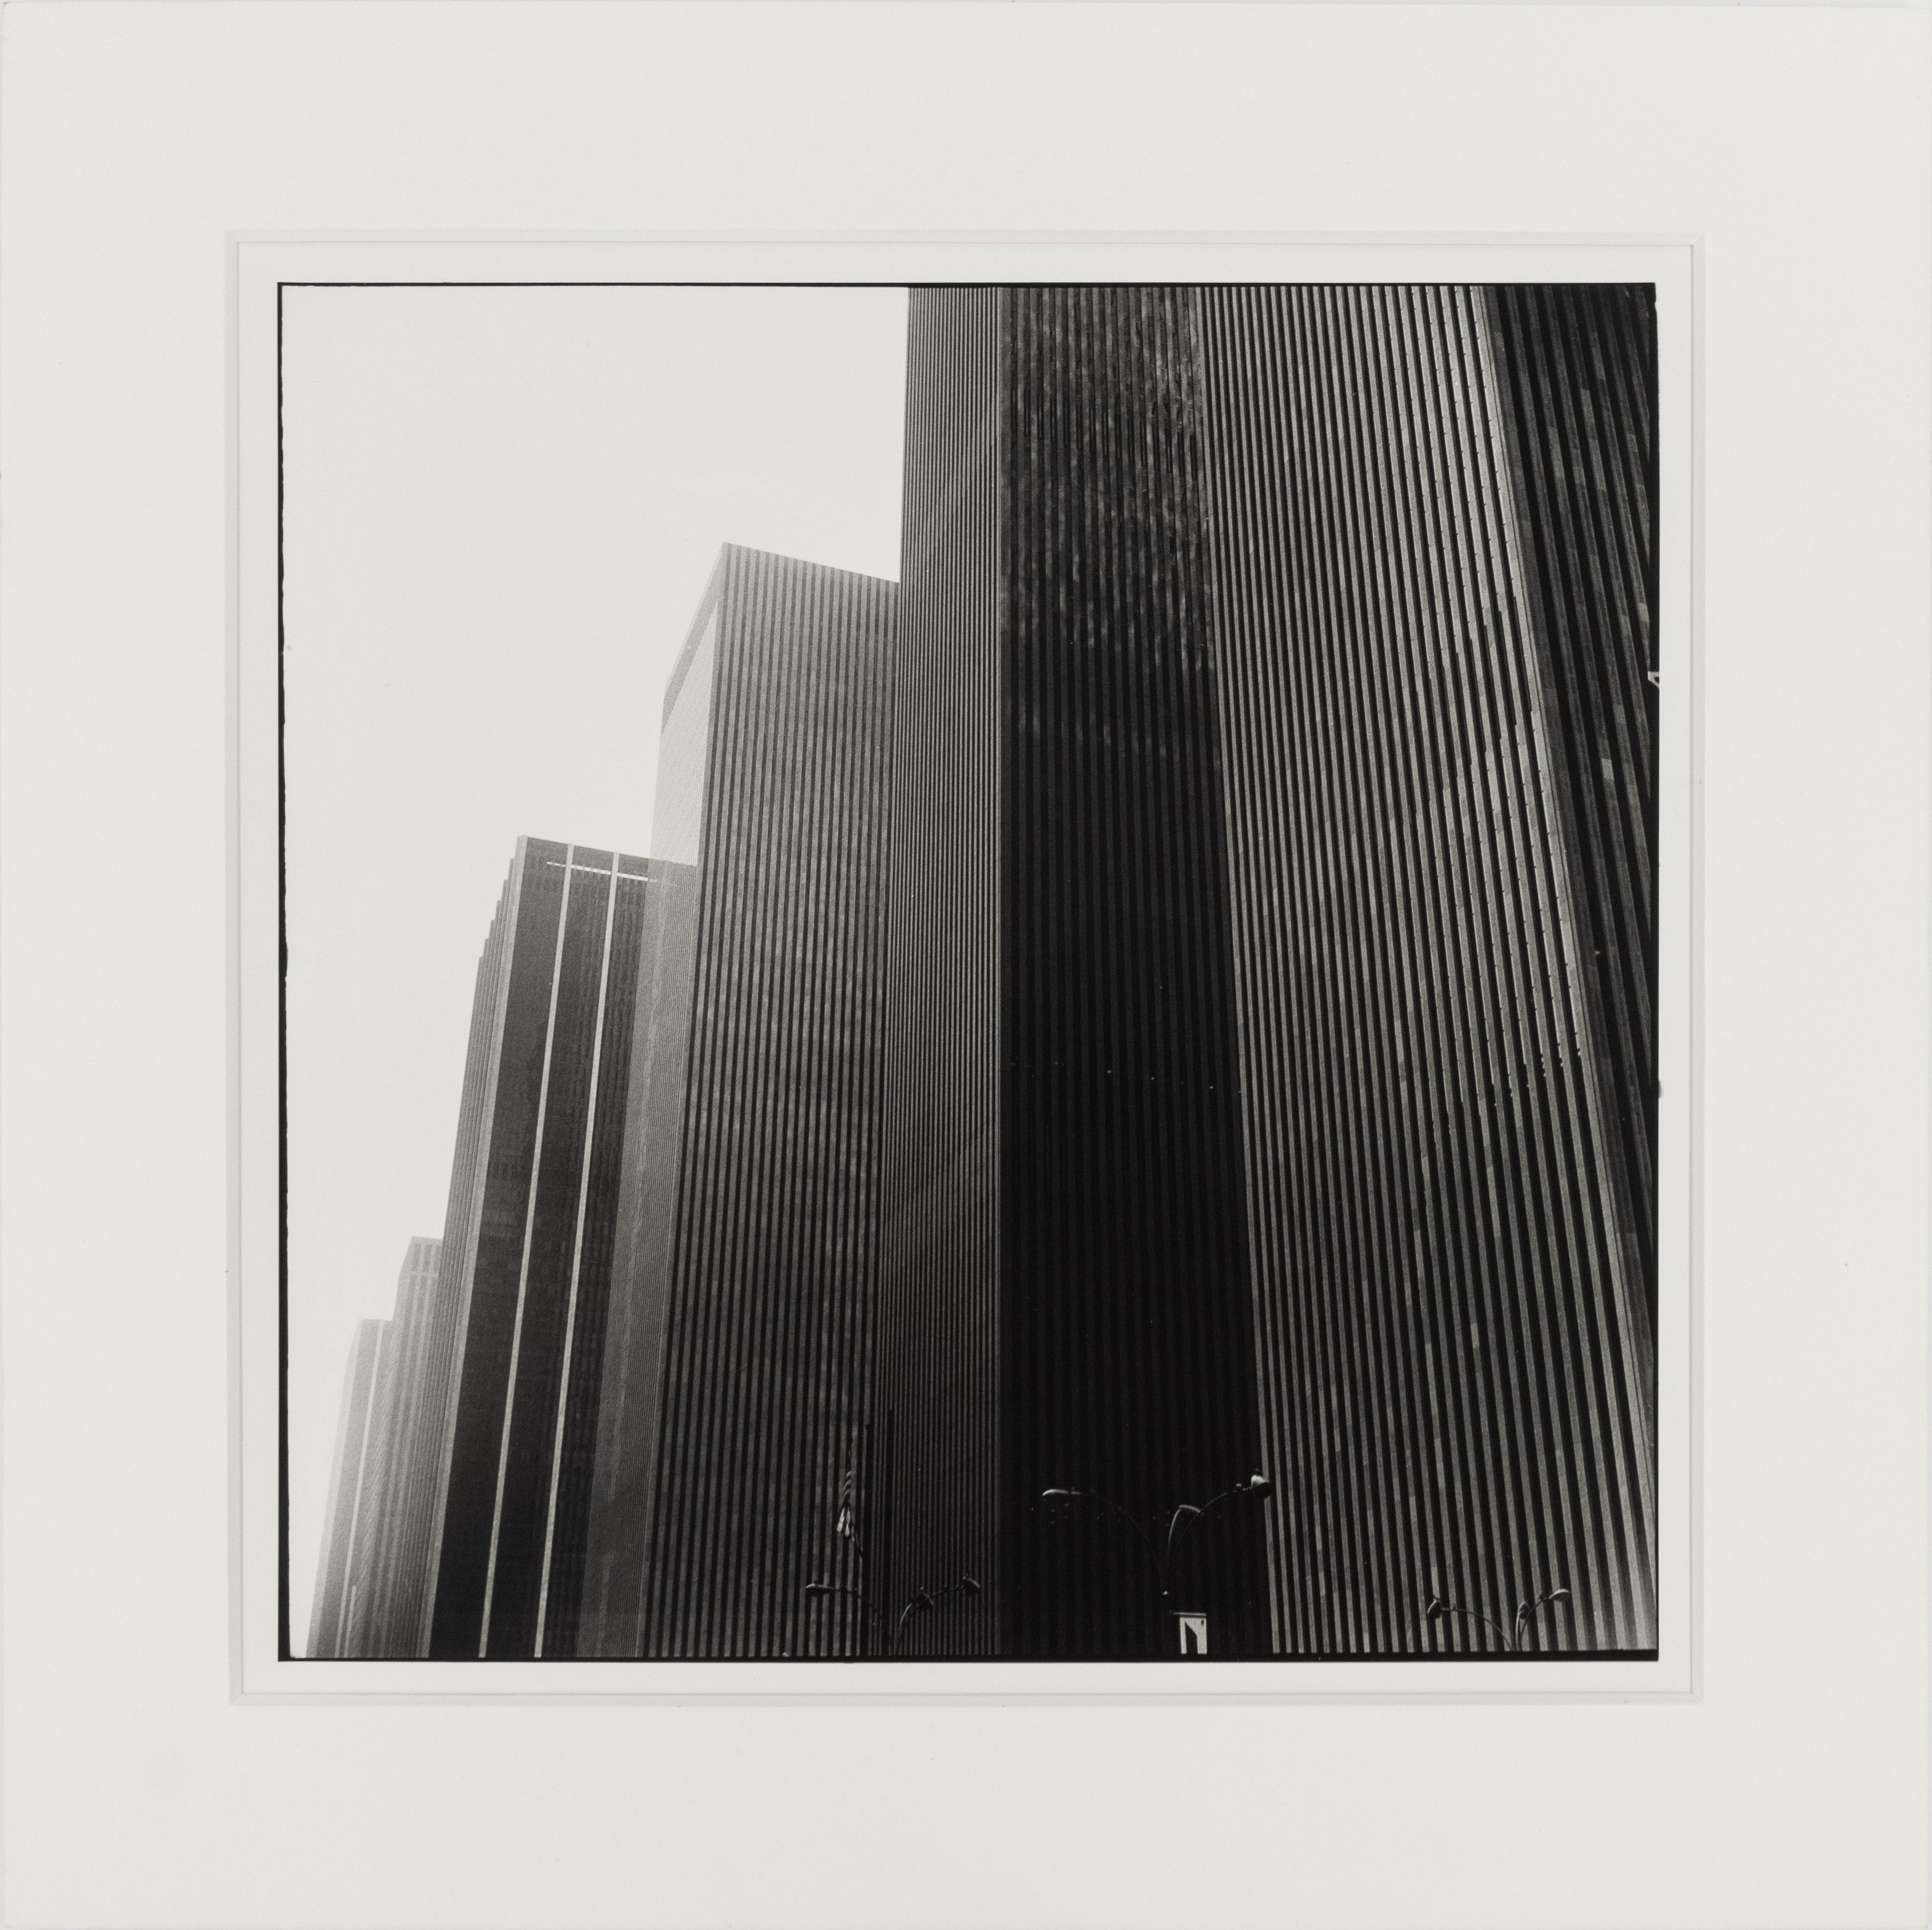 New York: Sixth Avenue - Contemporary Photograph by Peter Hujar